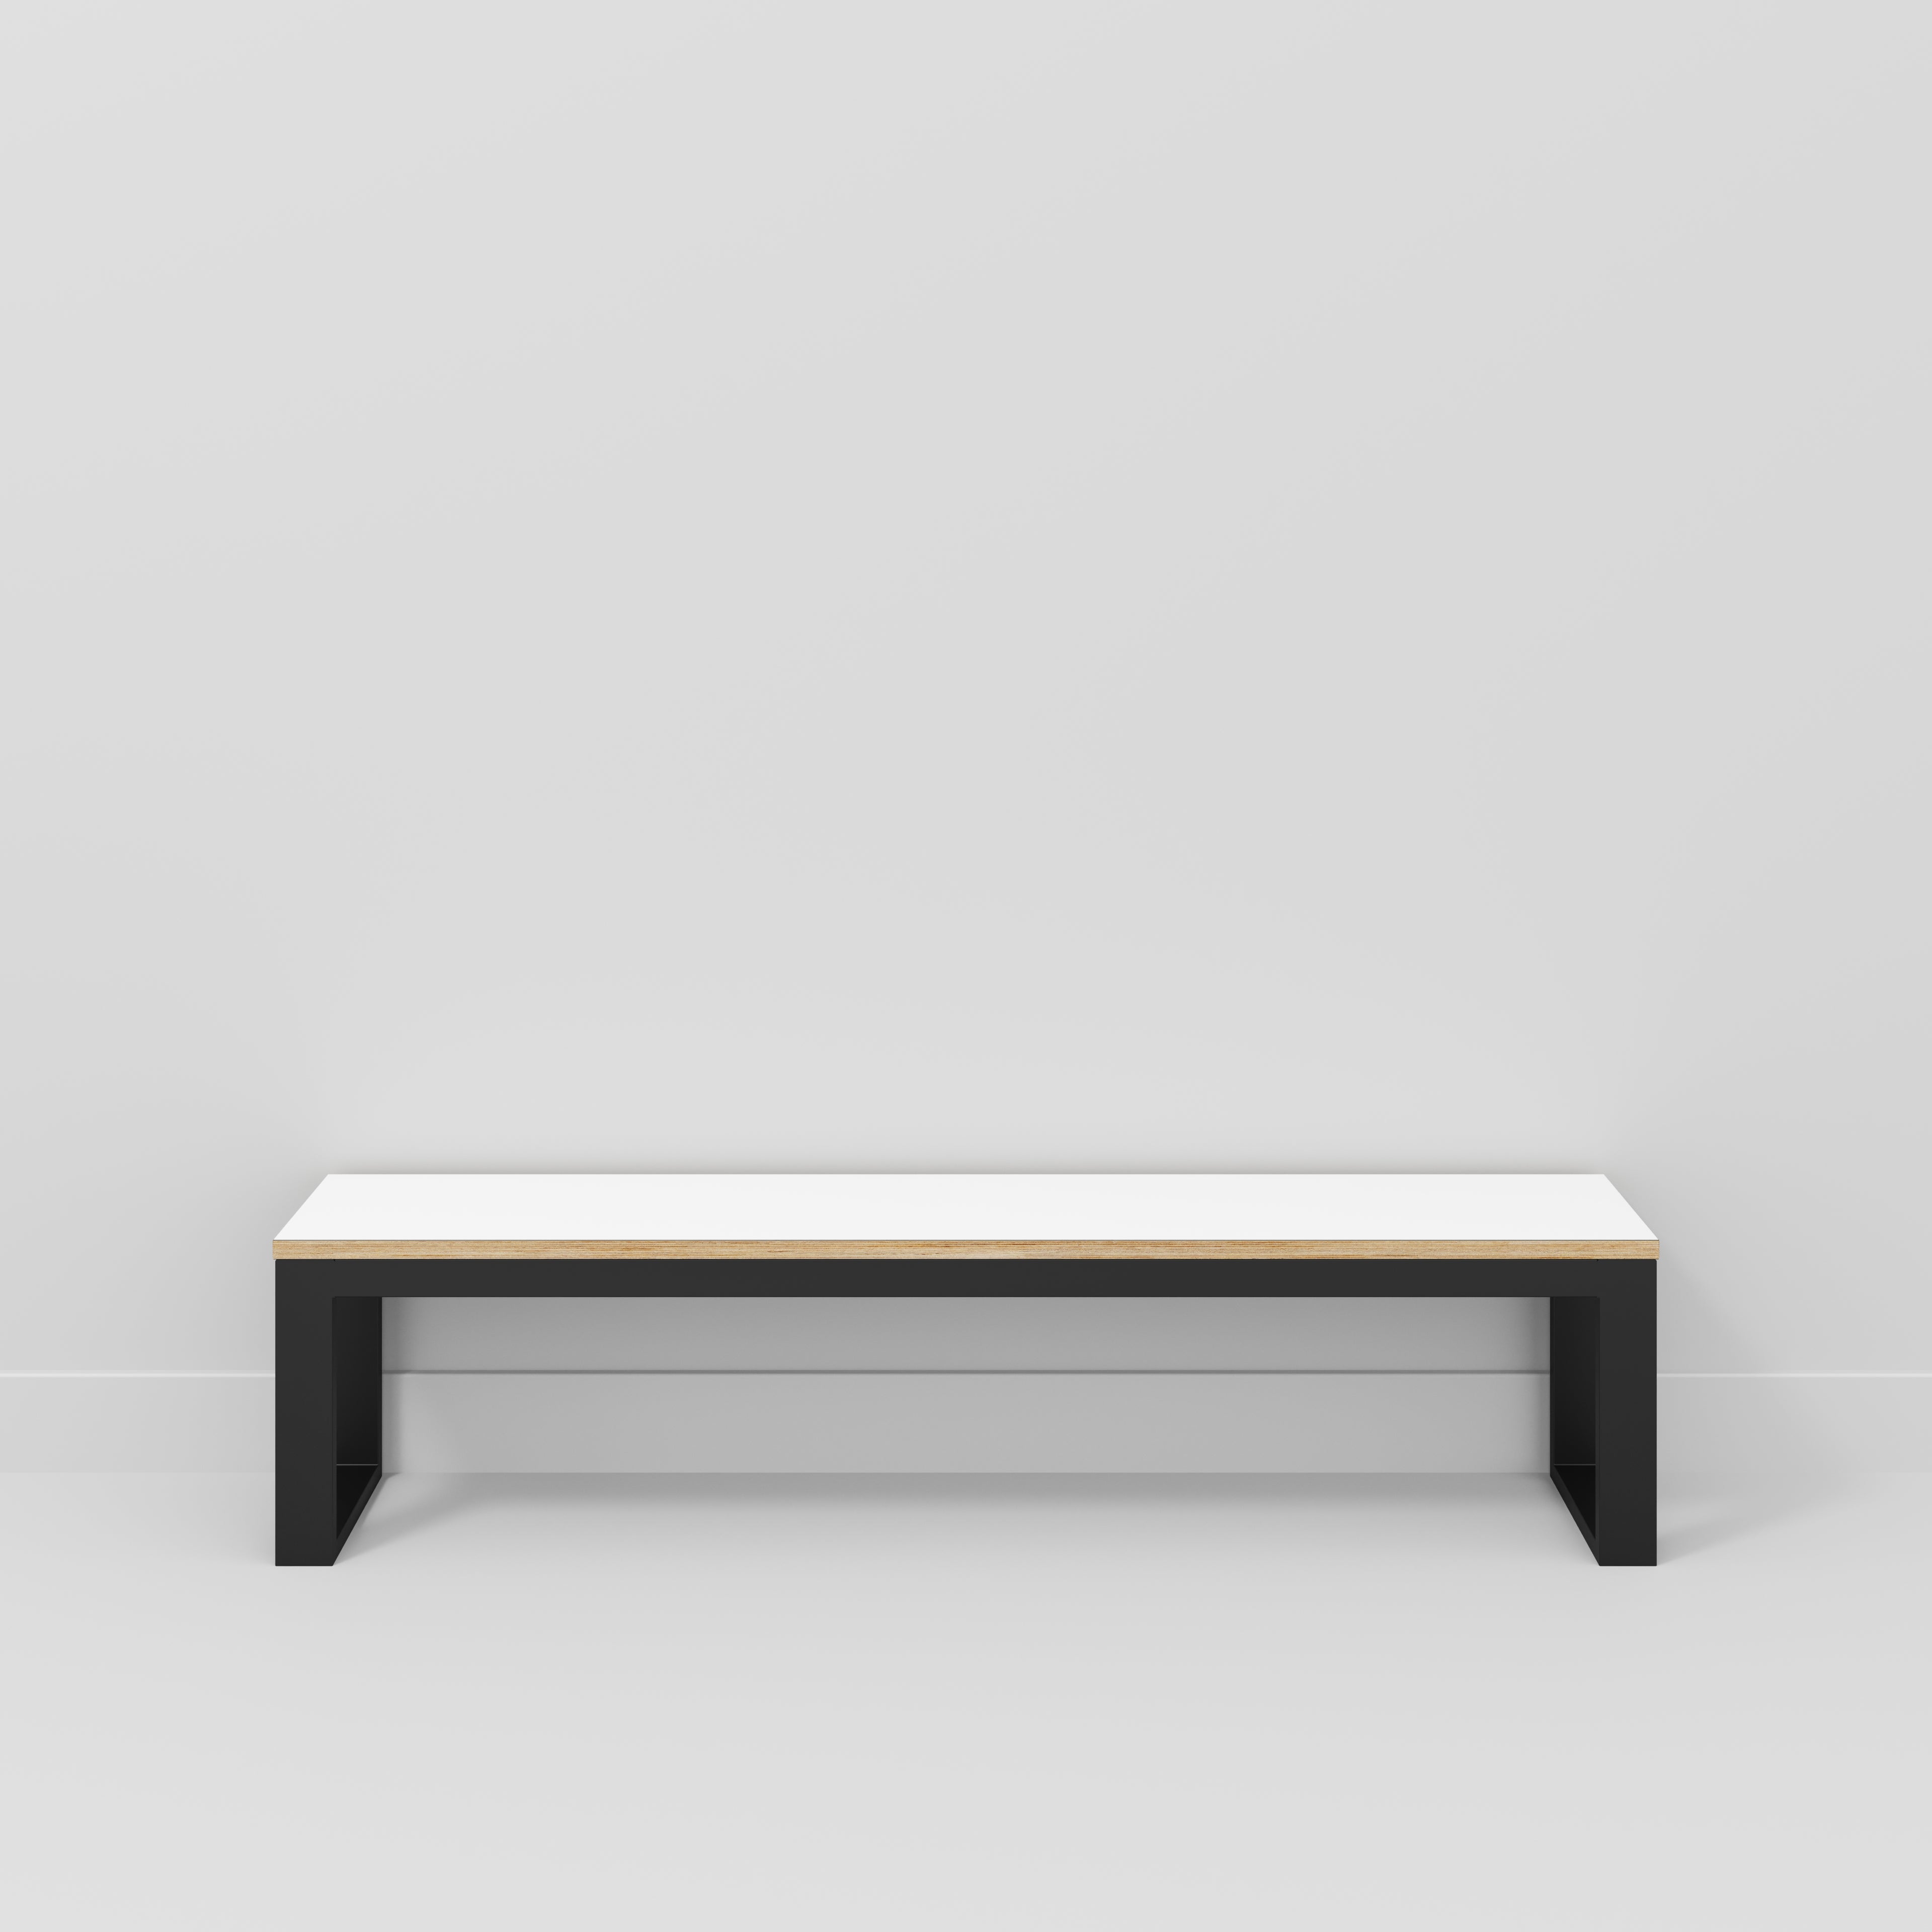 Bench Seat with Black Industrial Frame - Formica White - 1800(w) x 325(d)